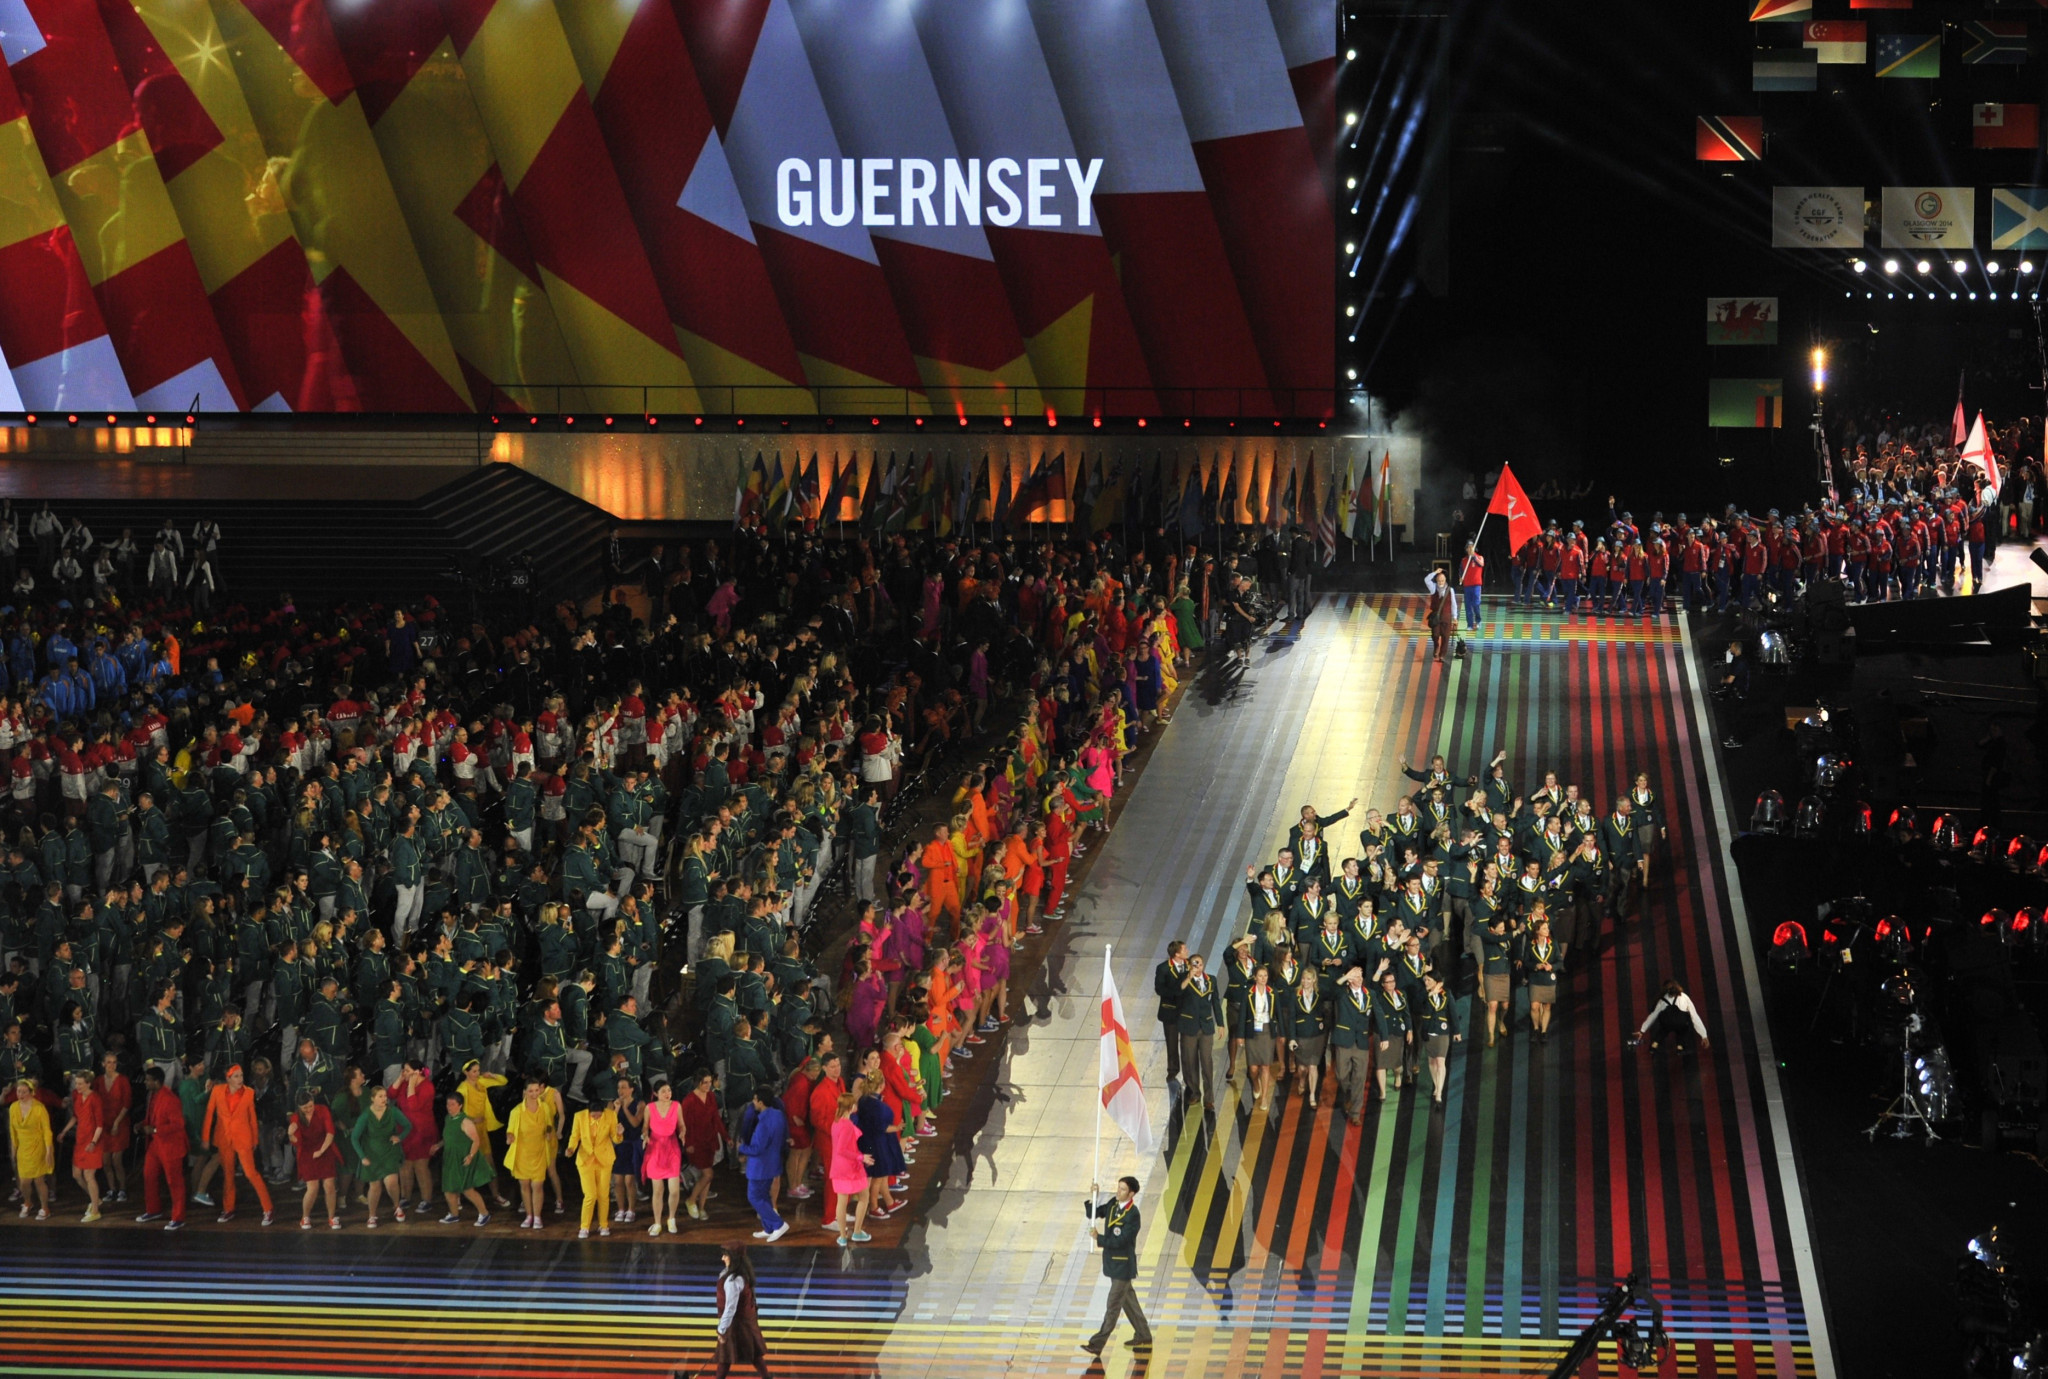 Guernsey has won one gold medal in its Commonwealth Games history ©Getty Images